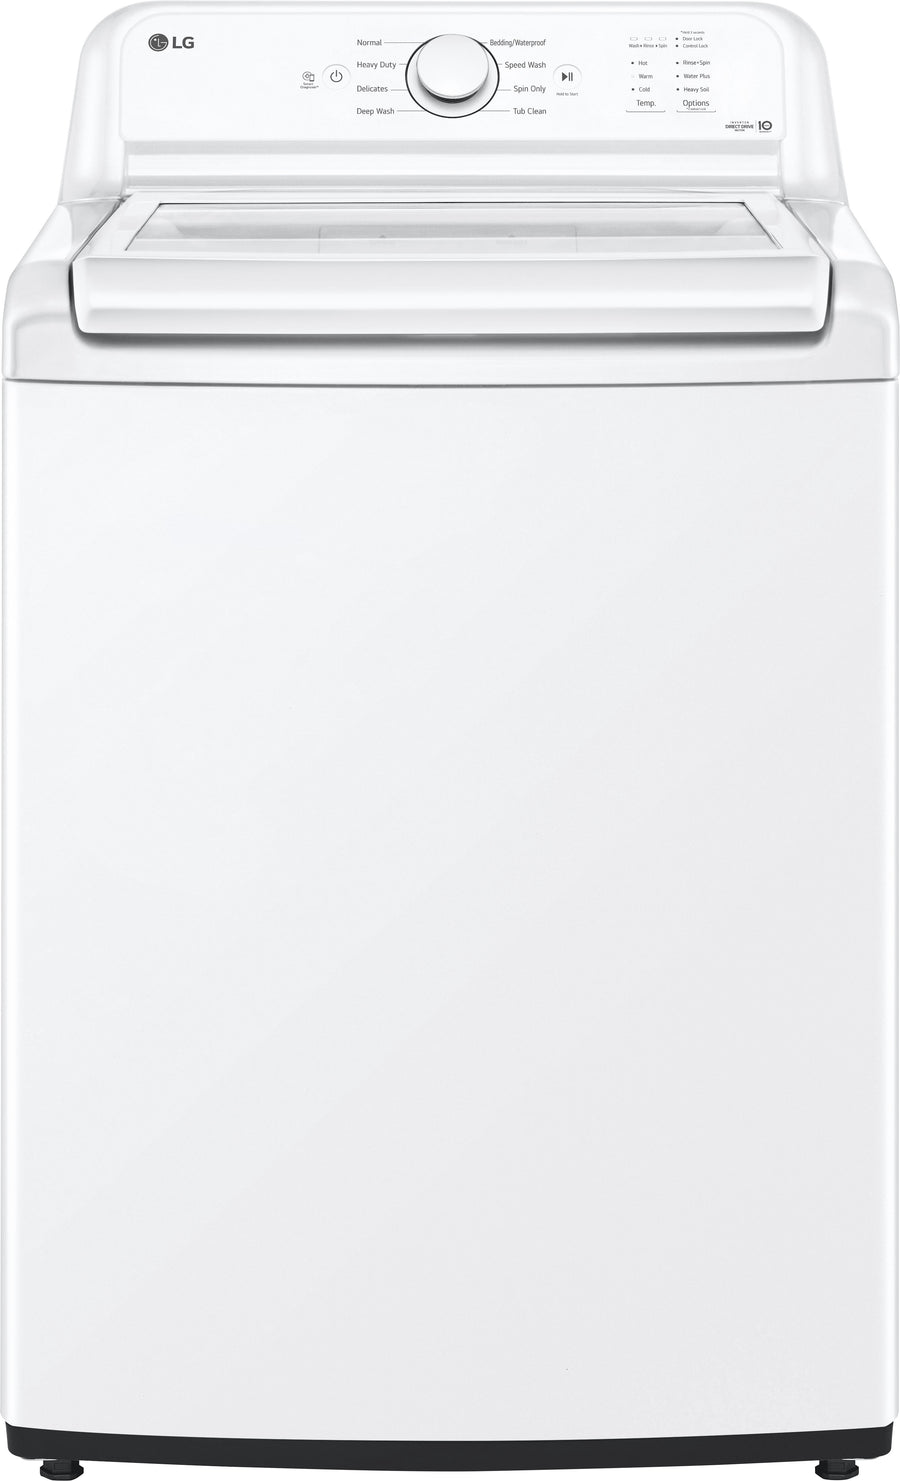 LG - 4.3 Cu. Ft. High-Efficiency Top Load Washer with SlamProof Glass Lid - White_0